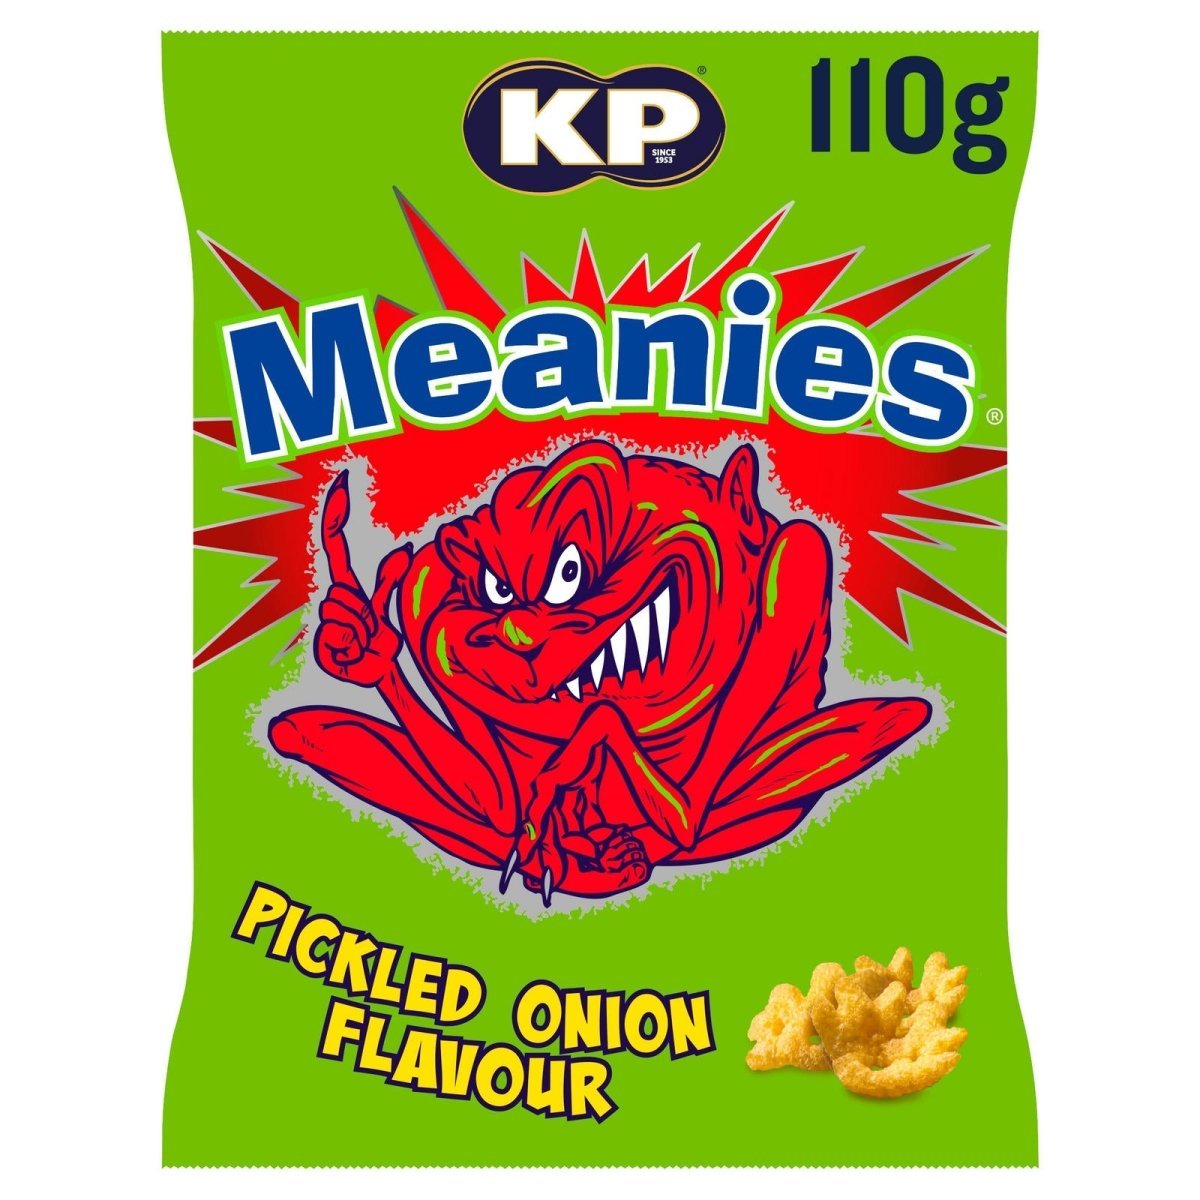 KP Meanies Pickled Onion Flavour 110g Best before (28/12/23) - Candy Mail UK